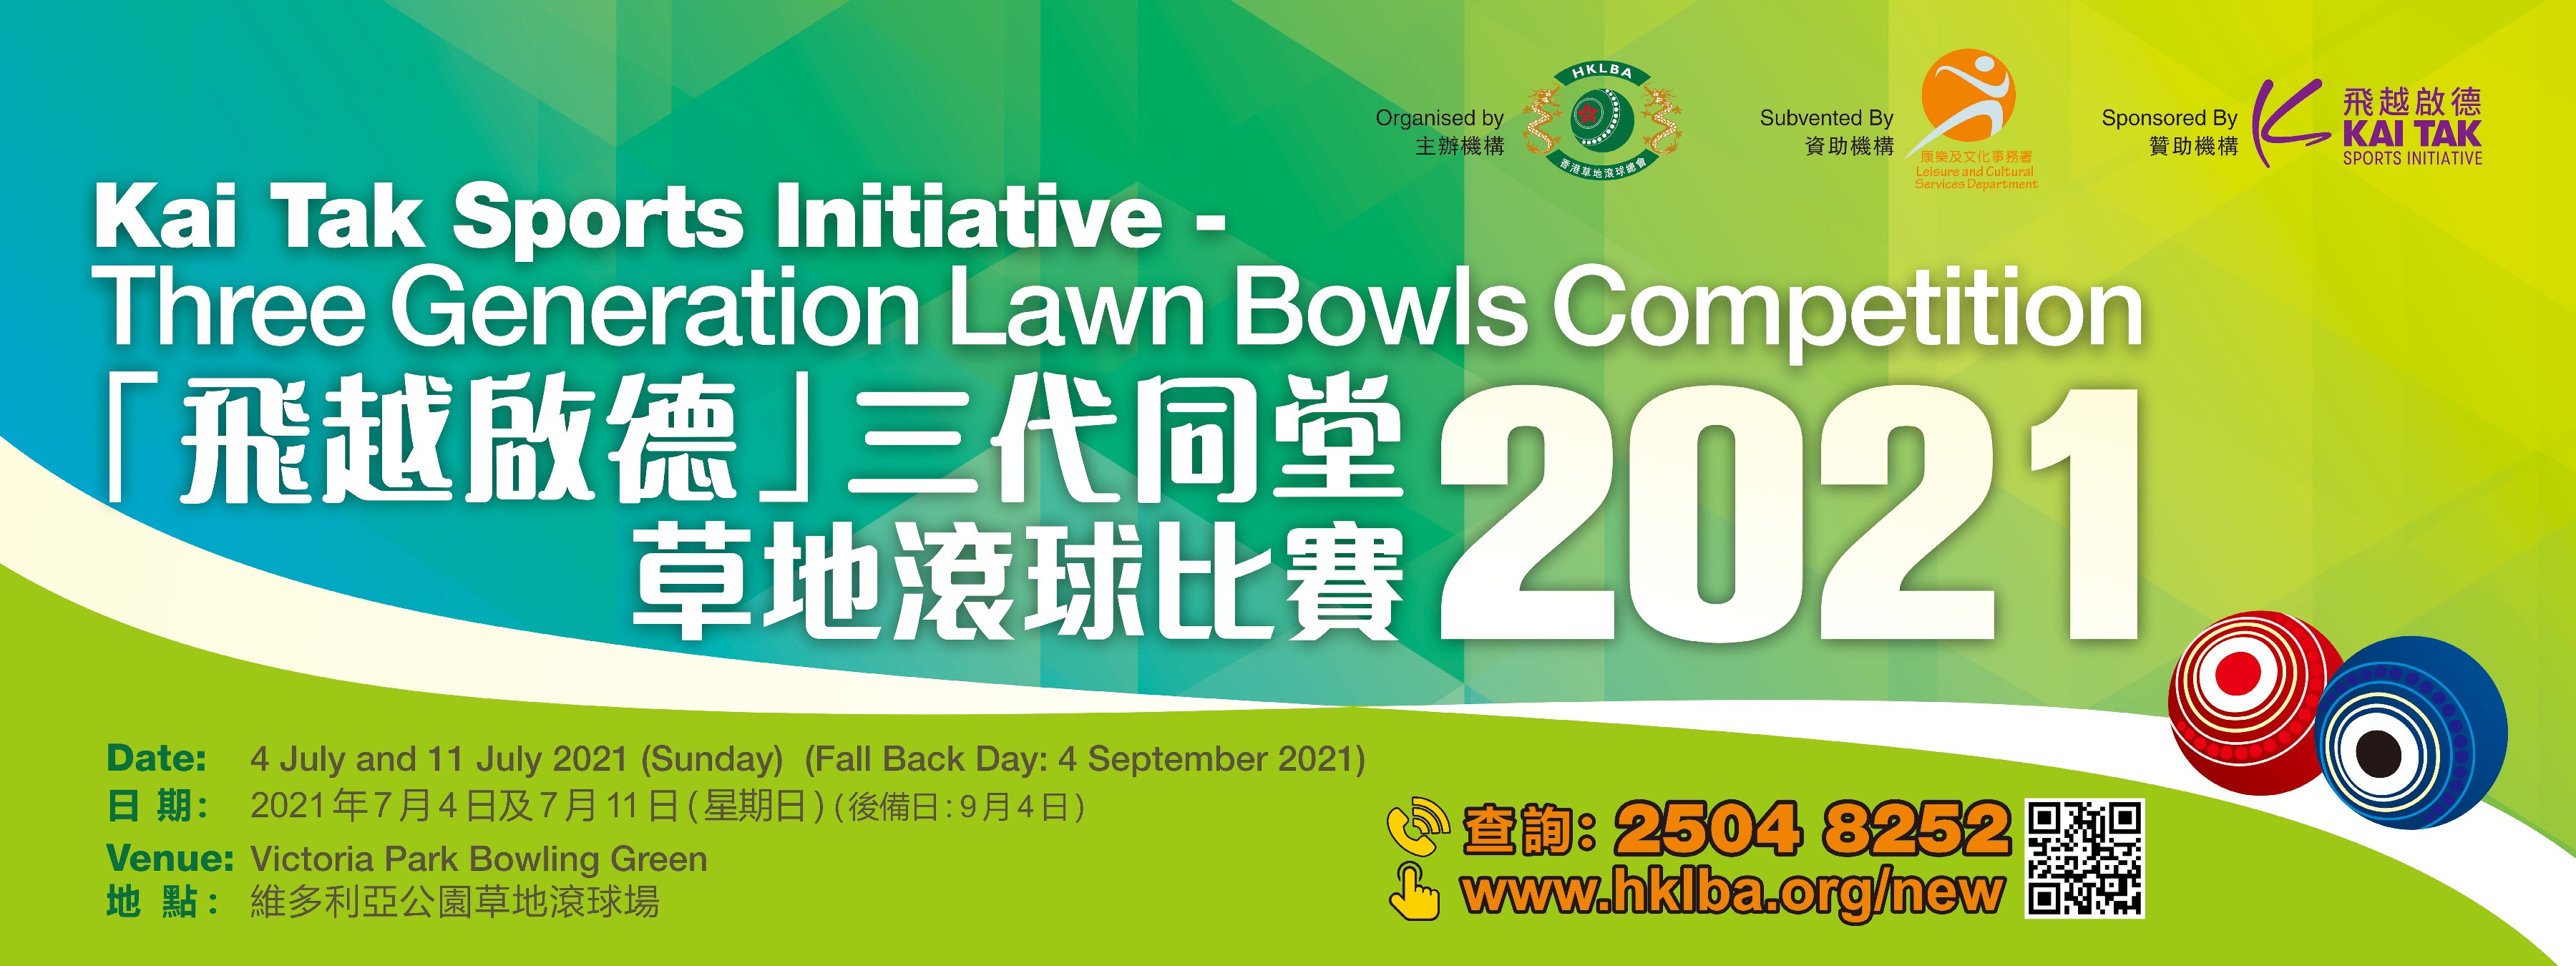 [Fixture Update]KTSI Three Generation Lawn Bowls Competition 2021